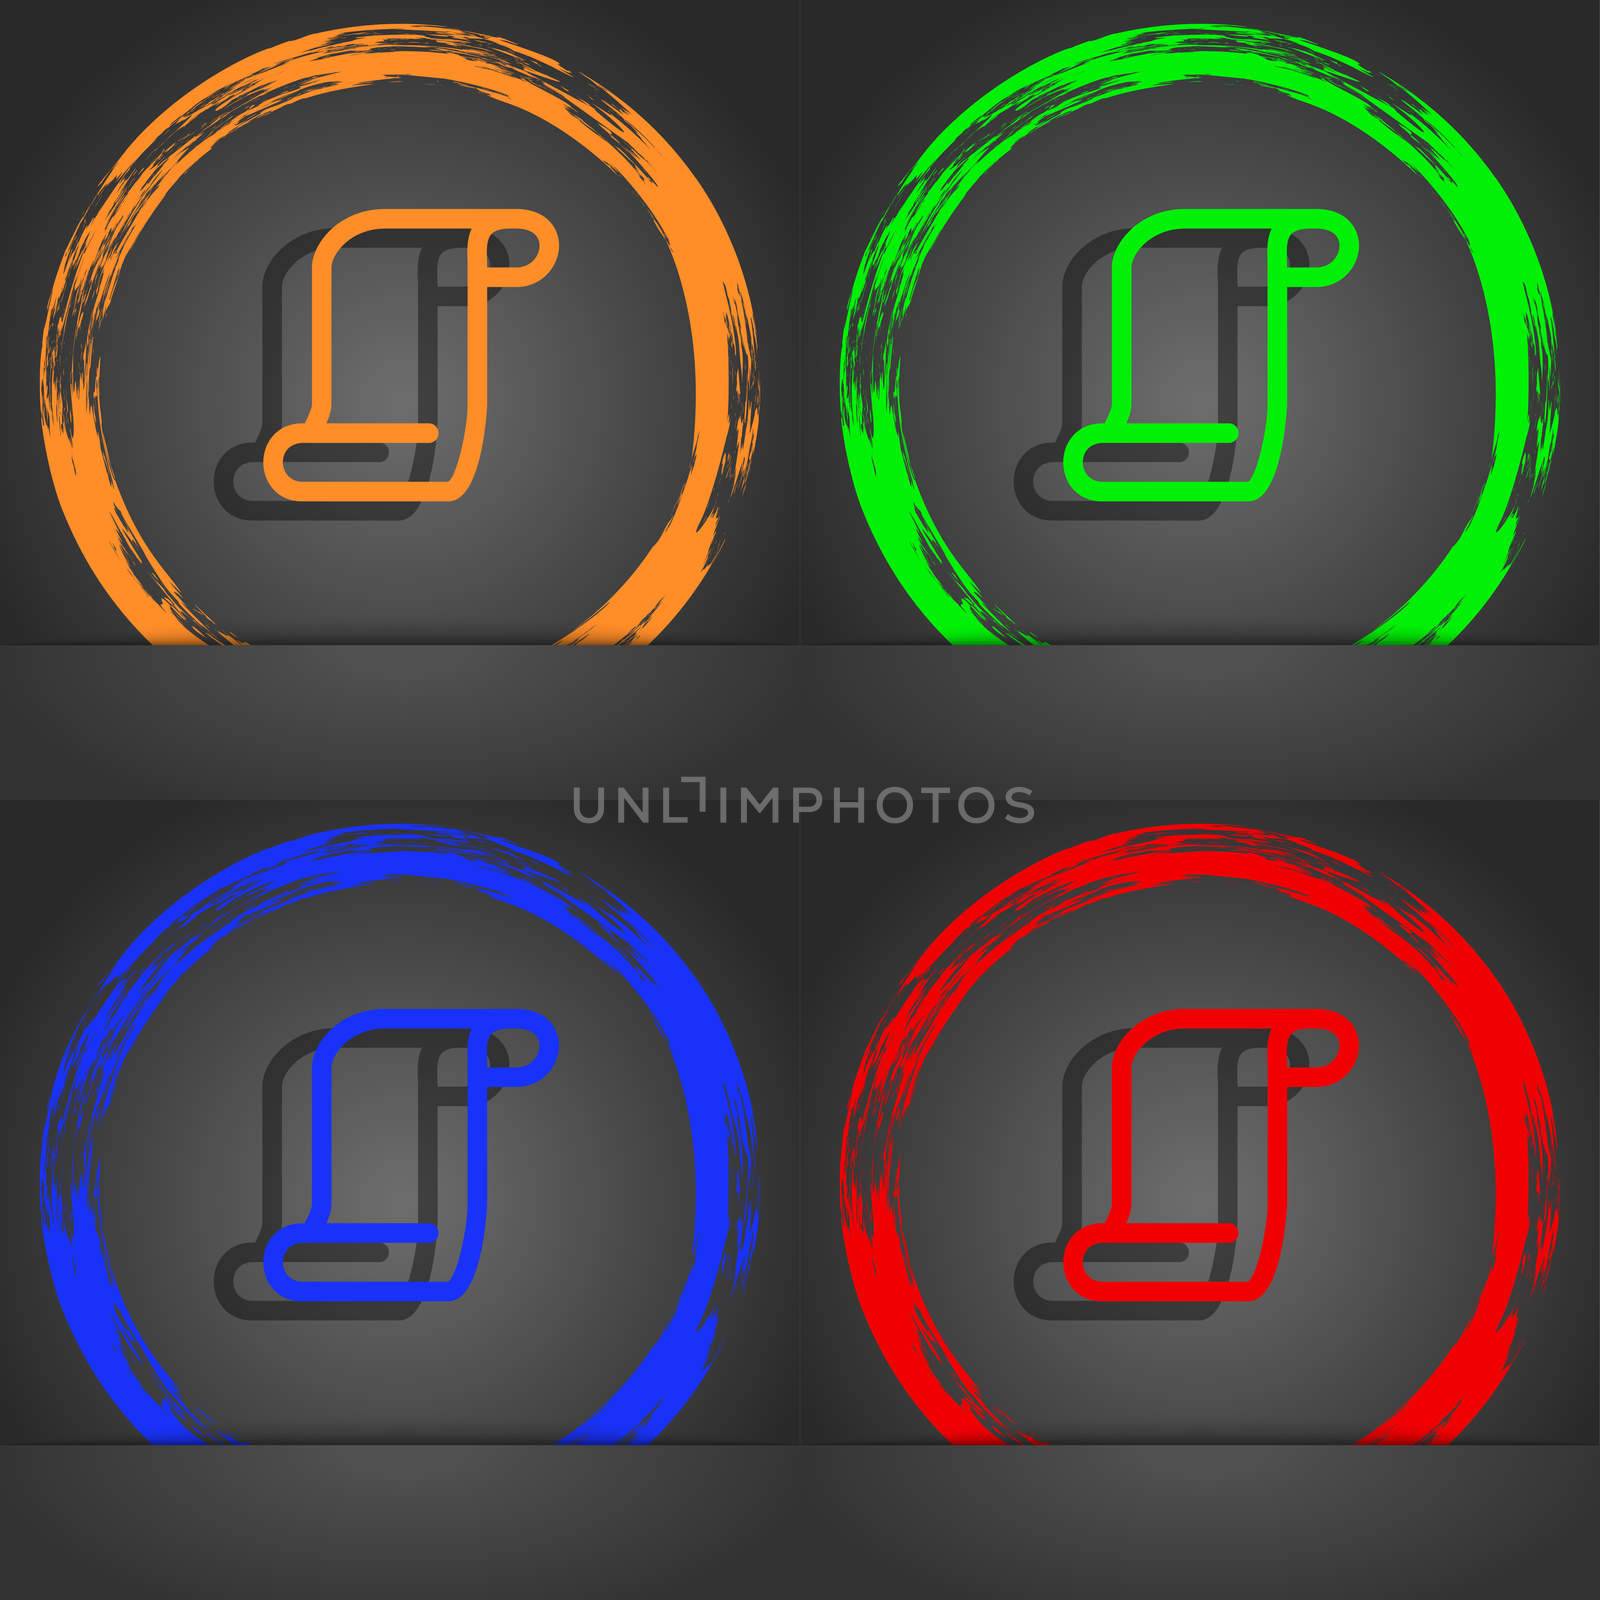 paper scroll icon symbol. Fashionable modern style. In the orange, green, blue, green design. illustration